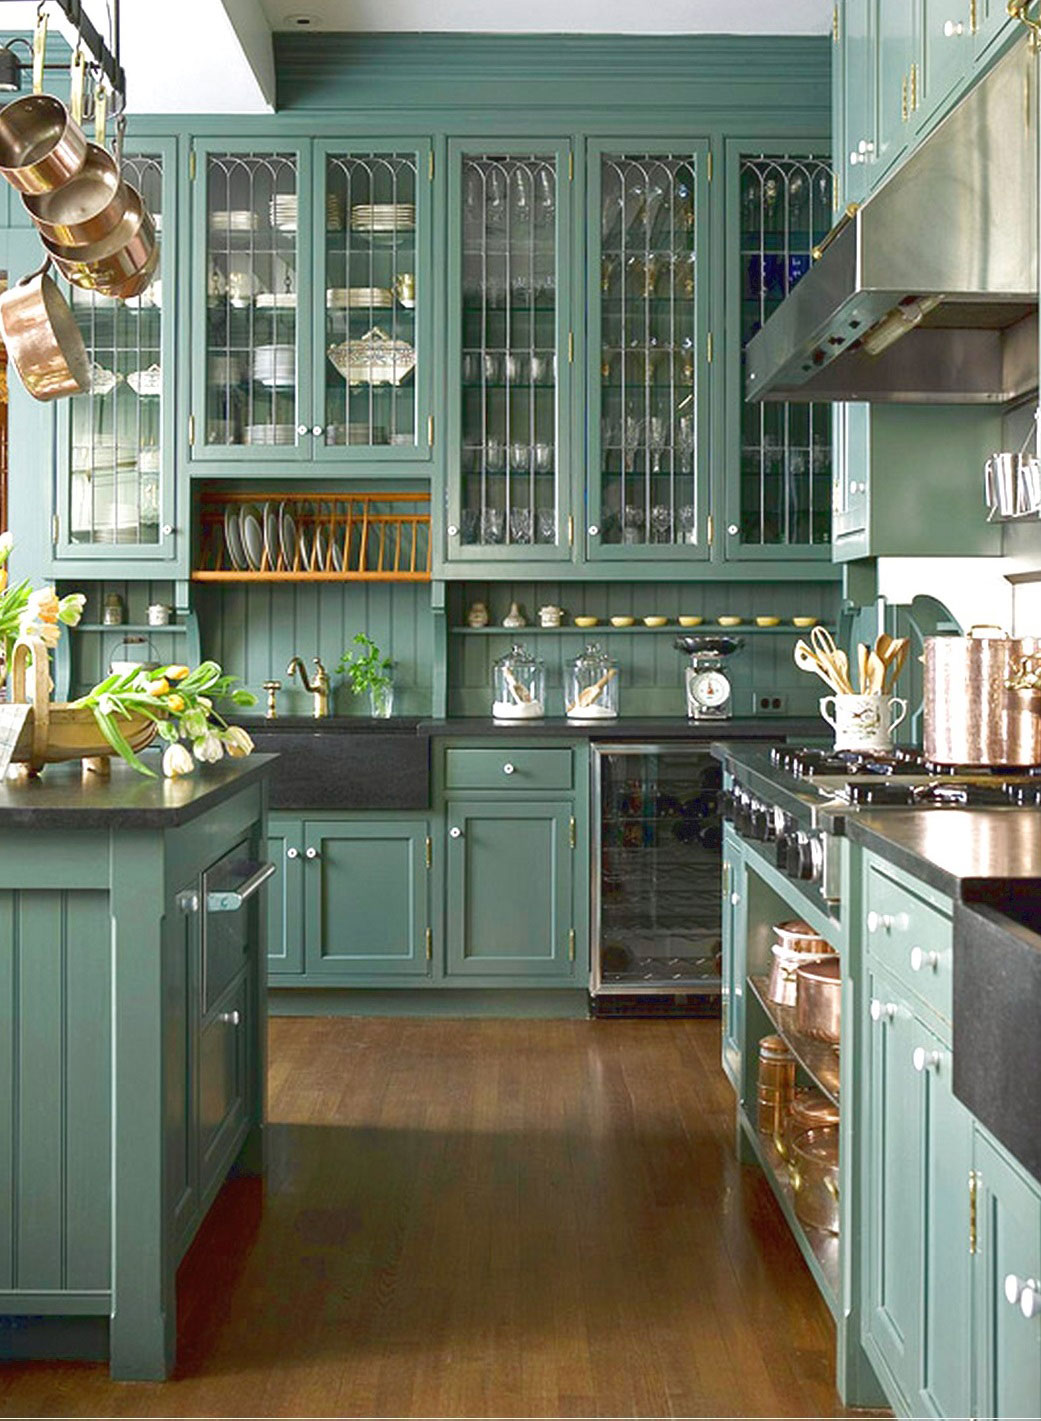 Green Kitchen Made Traditional Green Kitchen Cabinets Ideas Made From Wooden Material Combined With Glass Cabinet Door And Black Countertop Kitchen Green Kitchen Cabinets In Appealing Design For Modern Kitchen Interior